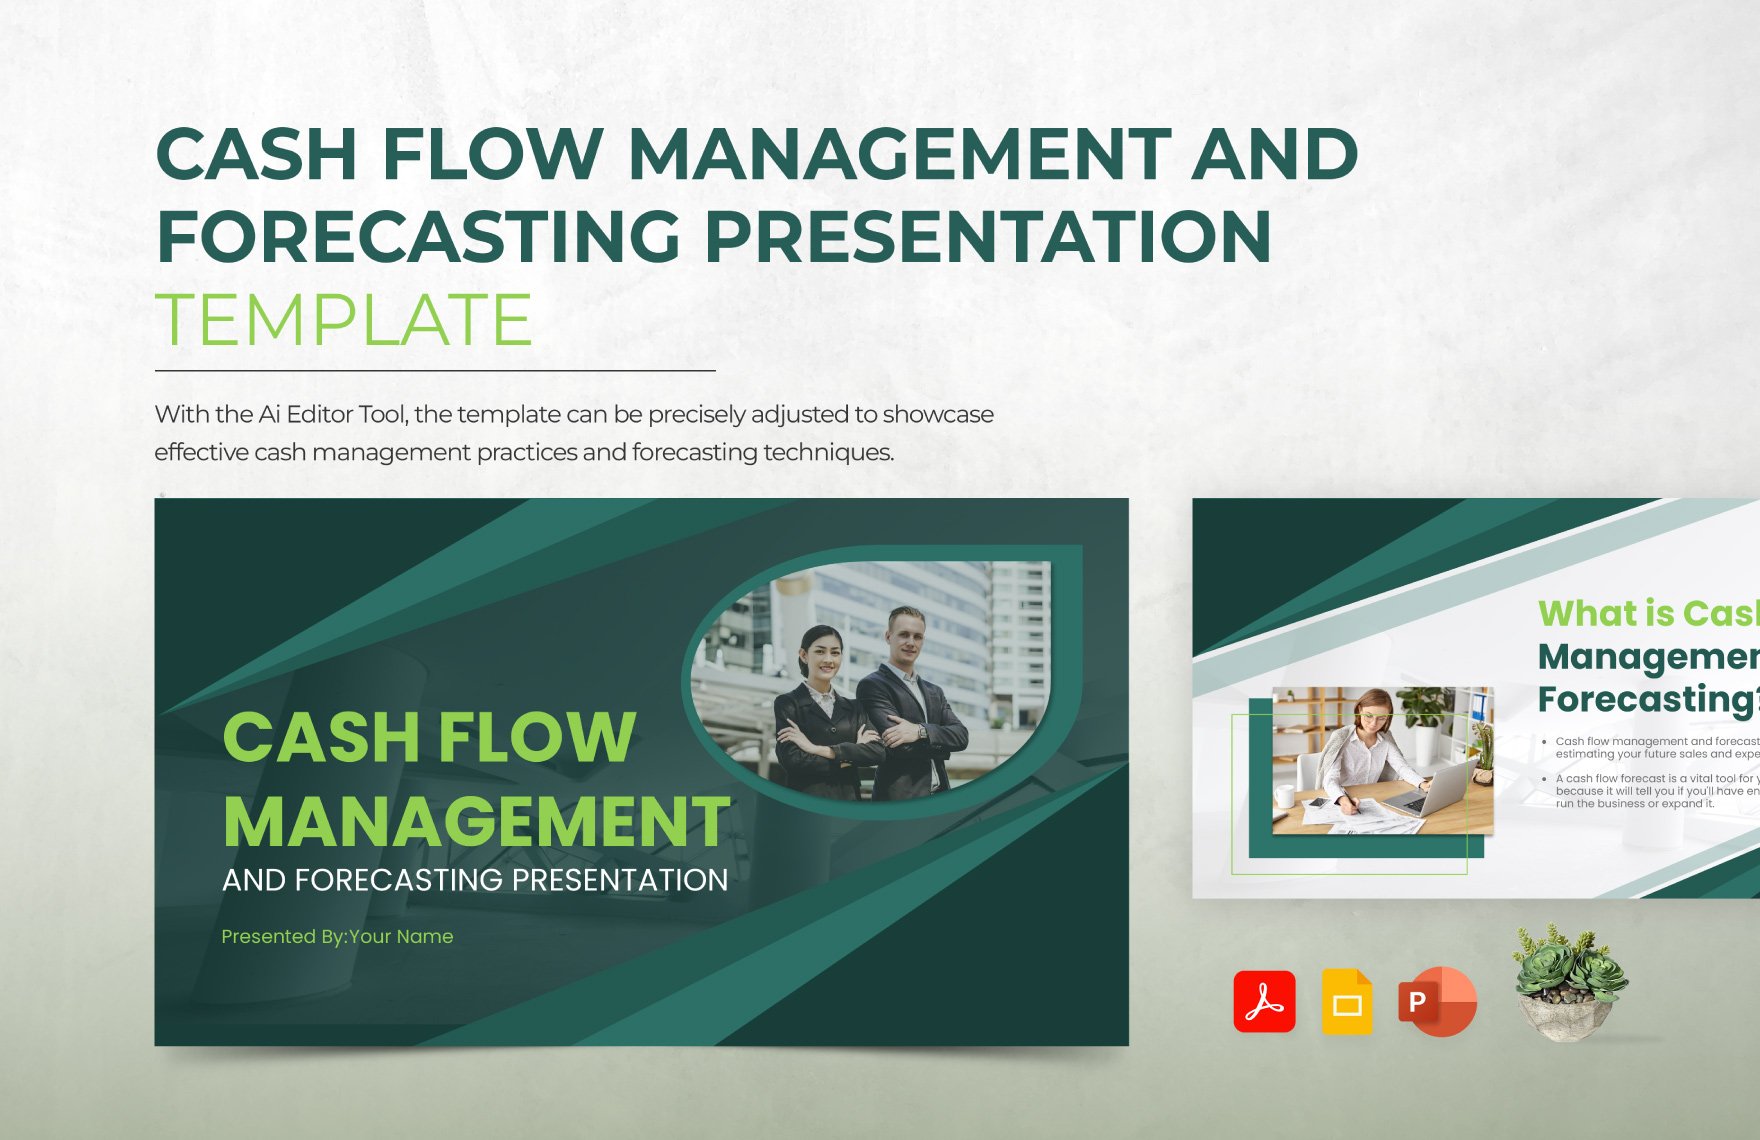 Free Cash Flow Management and Forecasting Presentation Template